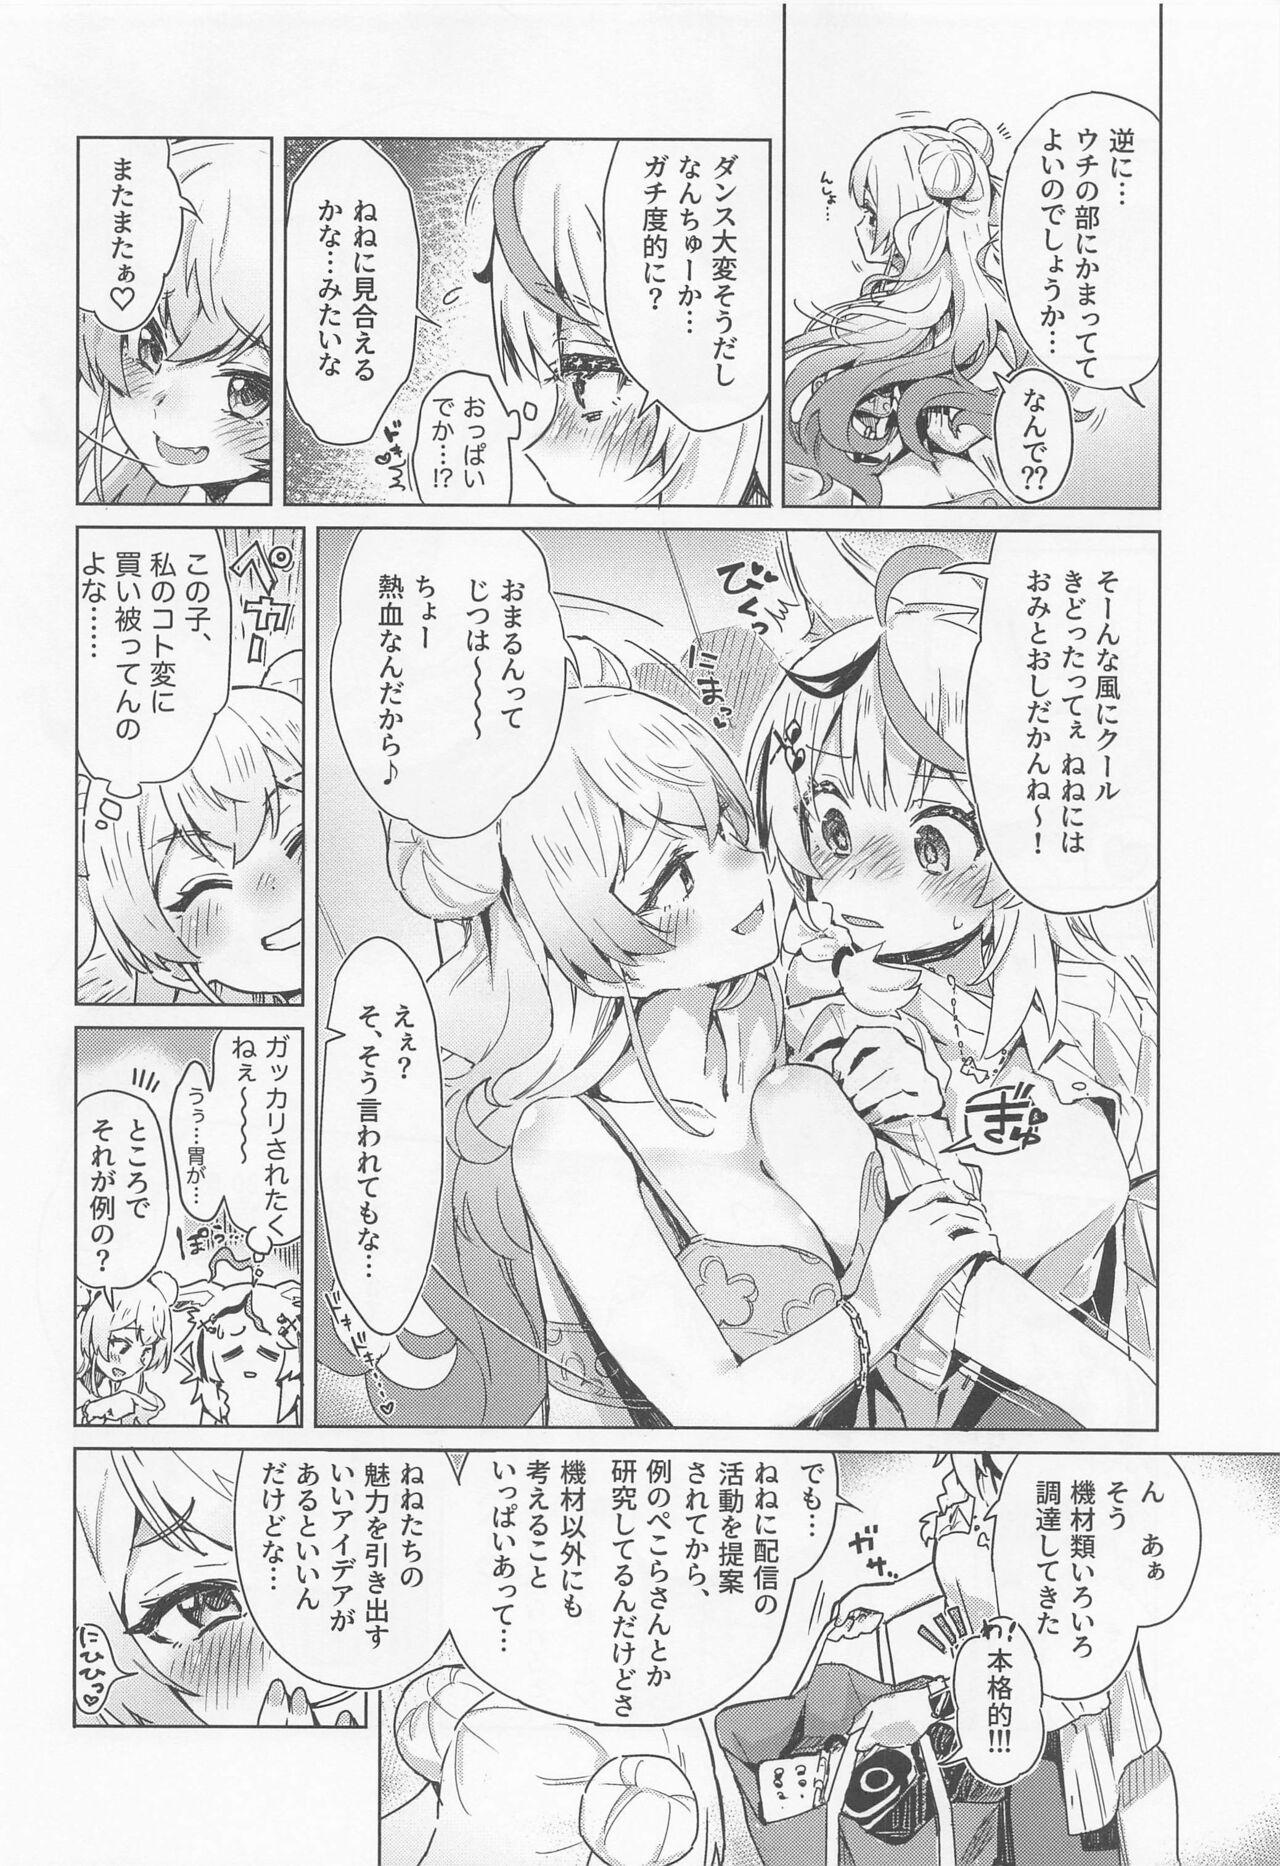 Hardcore Porno Fennec wa Iseijin no Yume o Miru ka - Does The Fennec Dream of The Lovely Visitor? - Hololive Cruising - Page 7